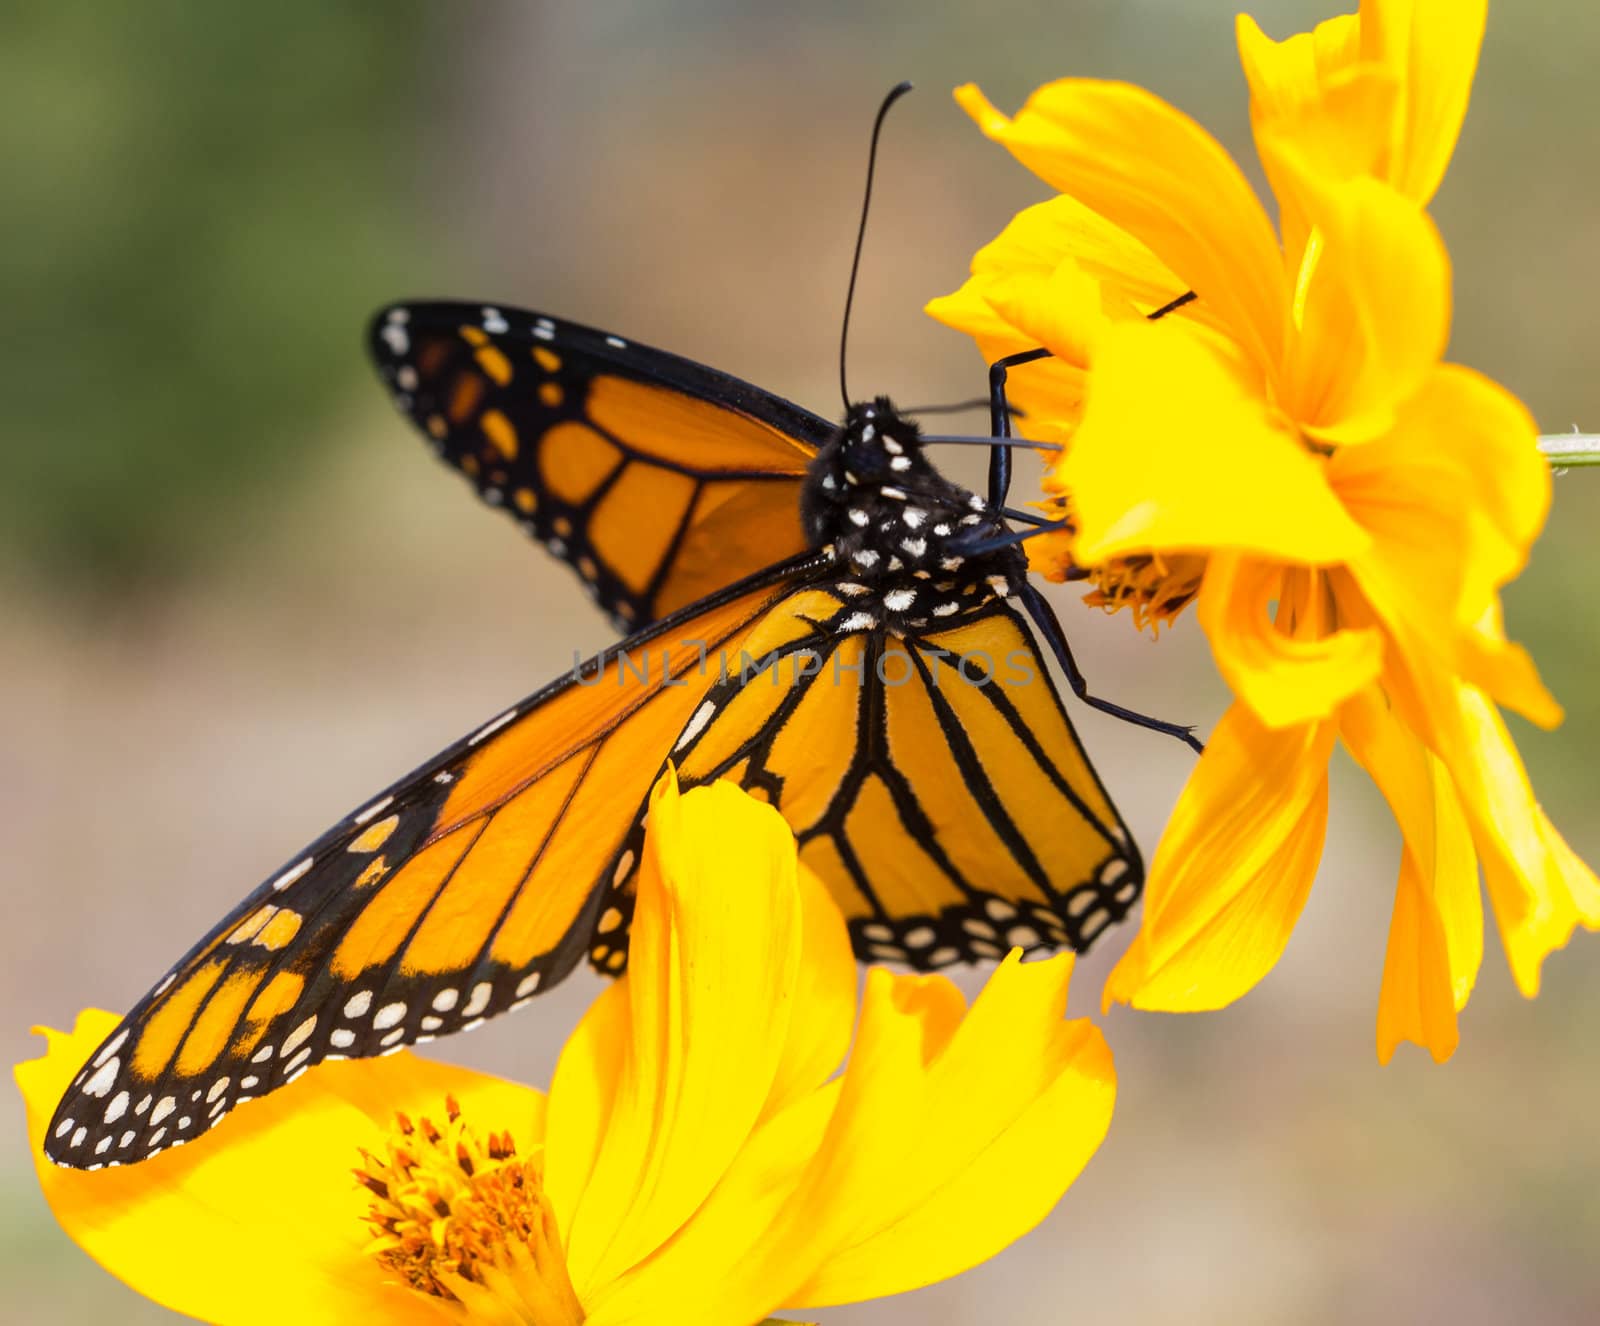 Migrating Monarch Butterlies in Autumn by wolterk